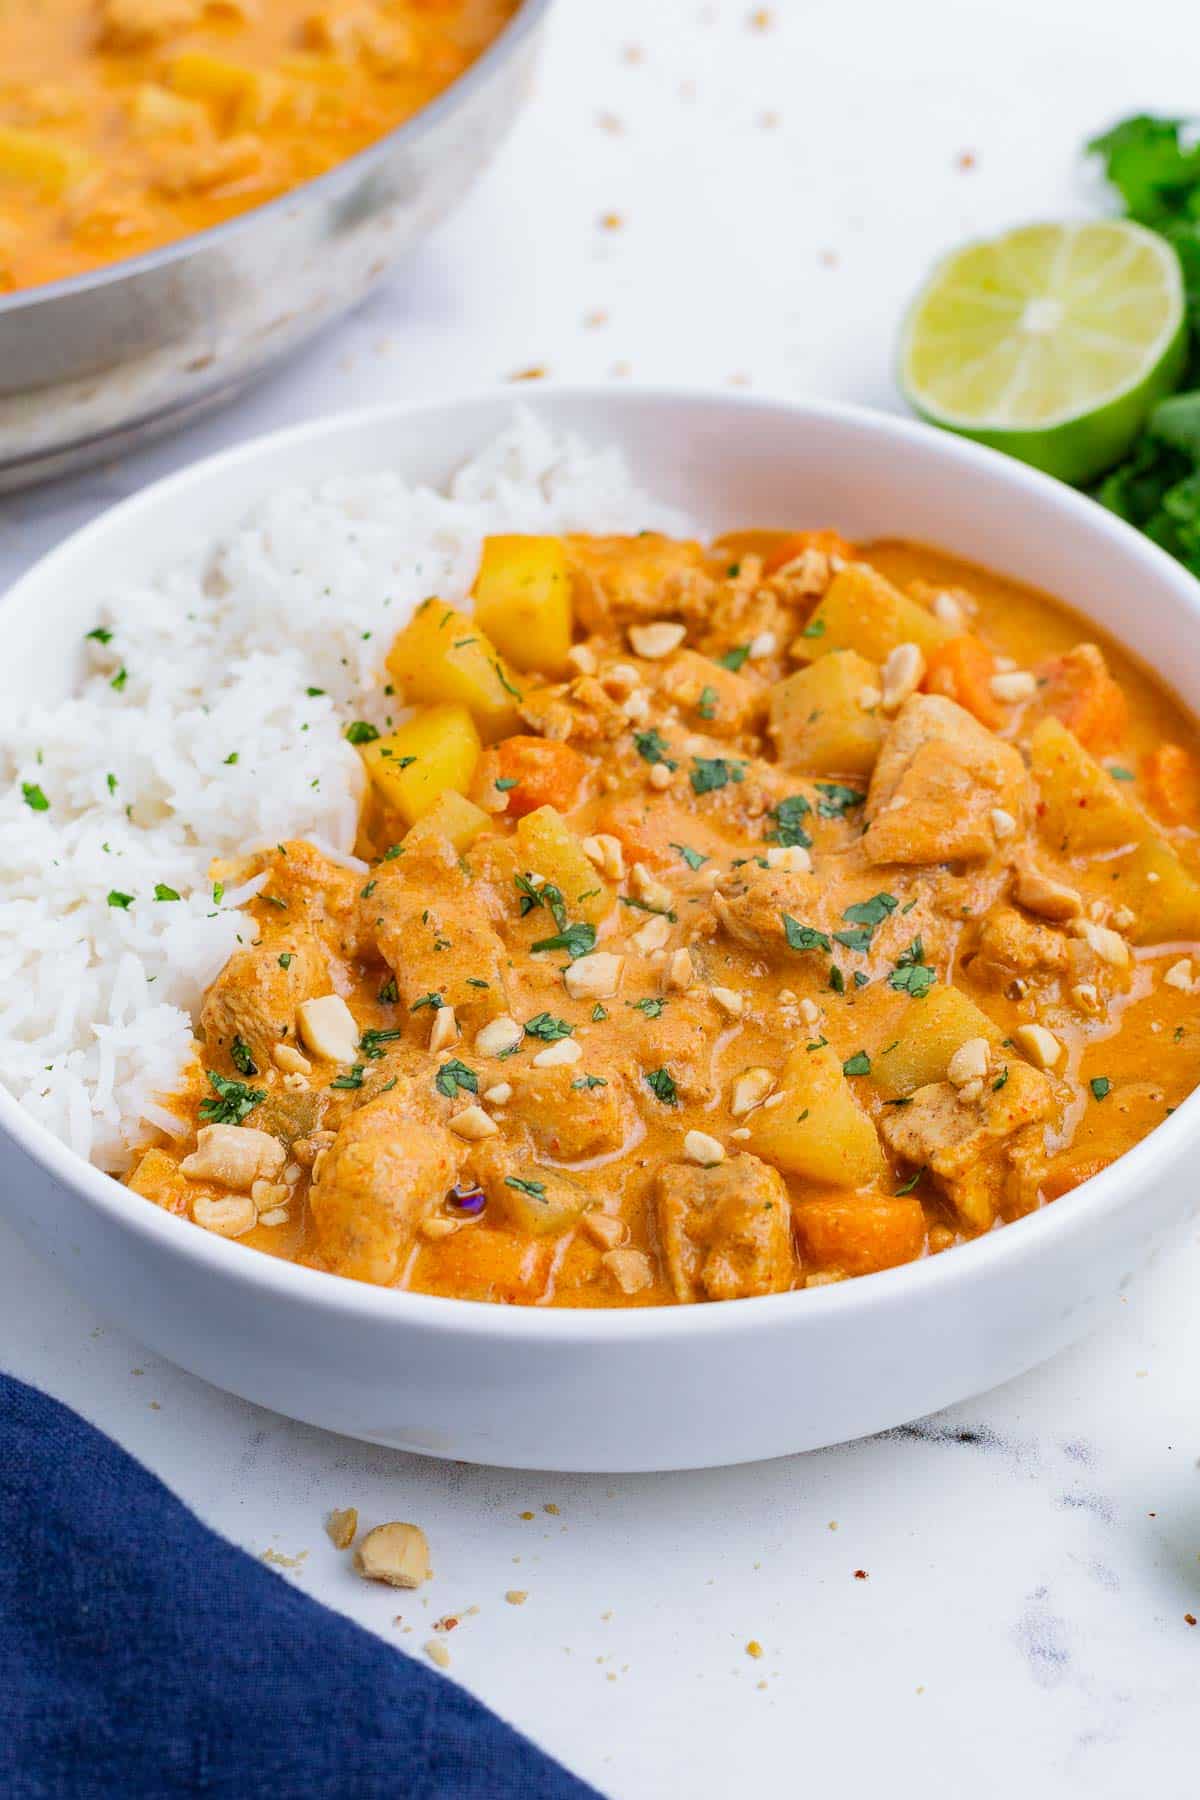 Serve this massaman curry over a bed of Basmati rice.